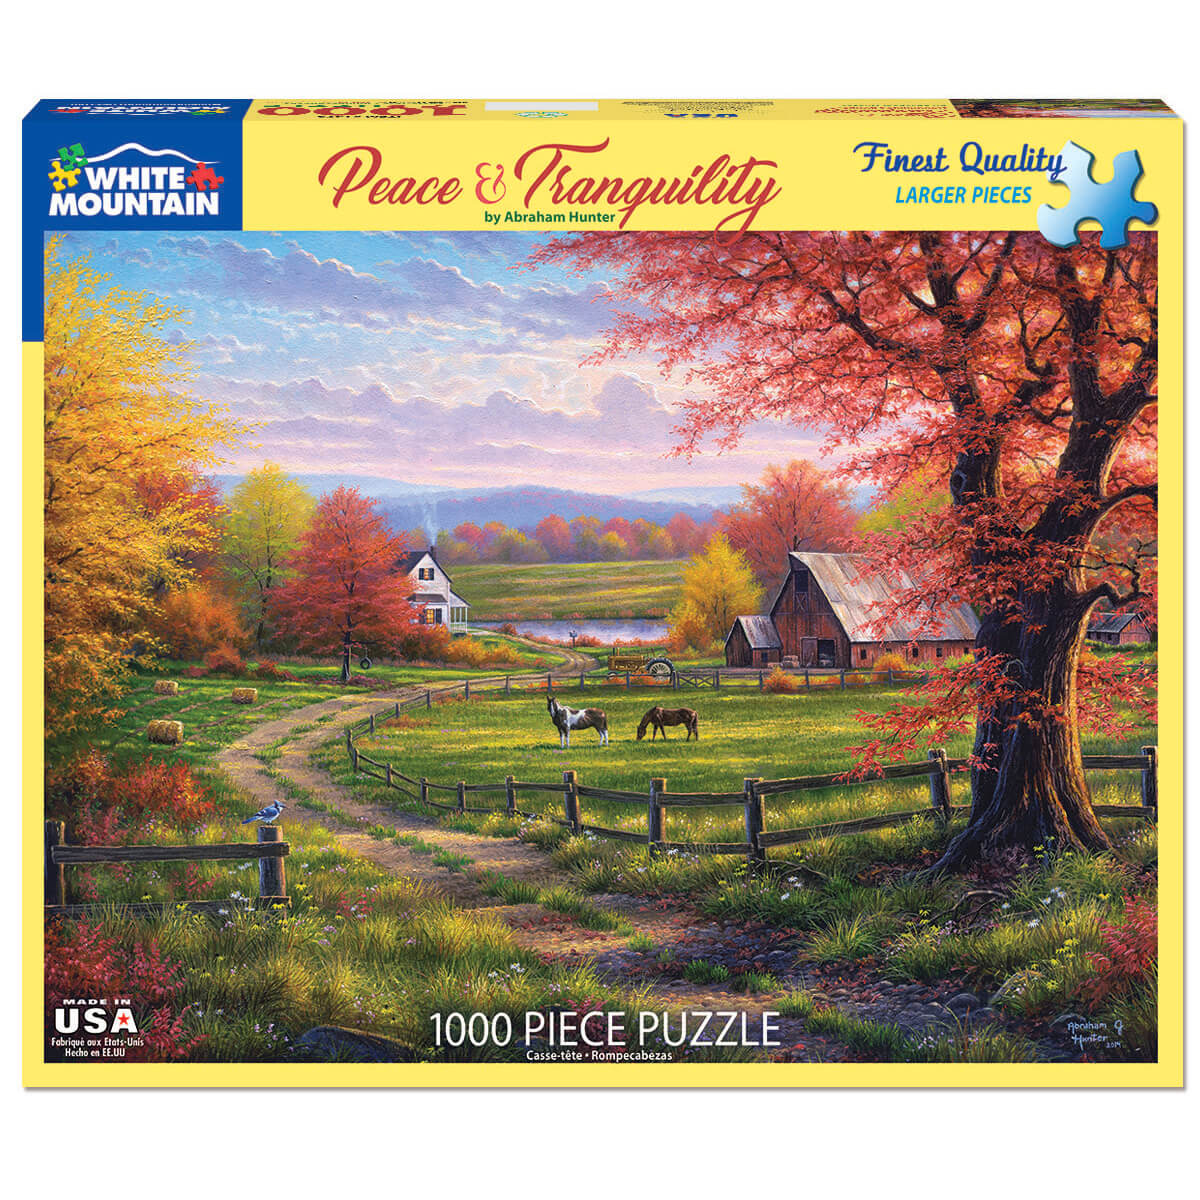 White Mountain Puzzles Peaceful Tranquility 1000 Piece Jigsaw Puzzle